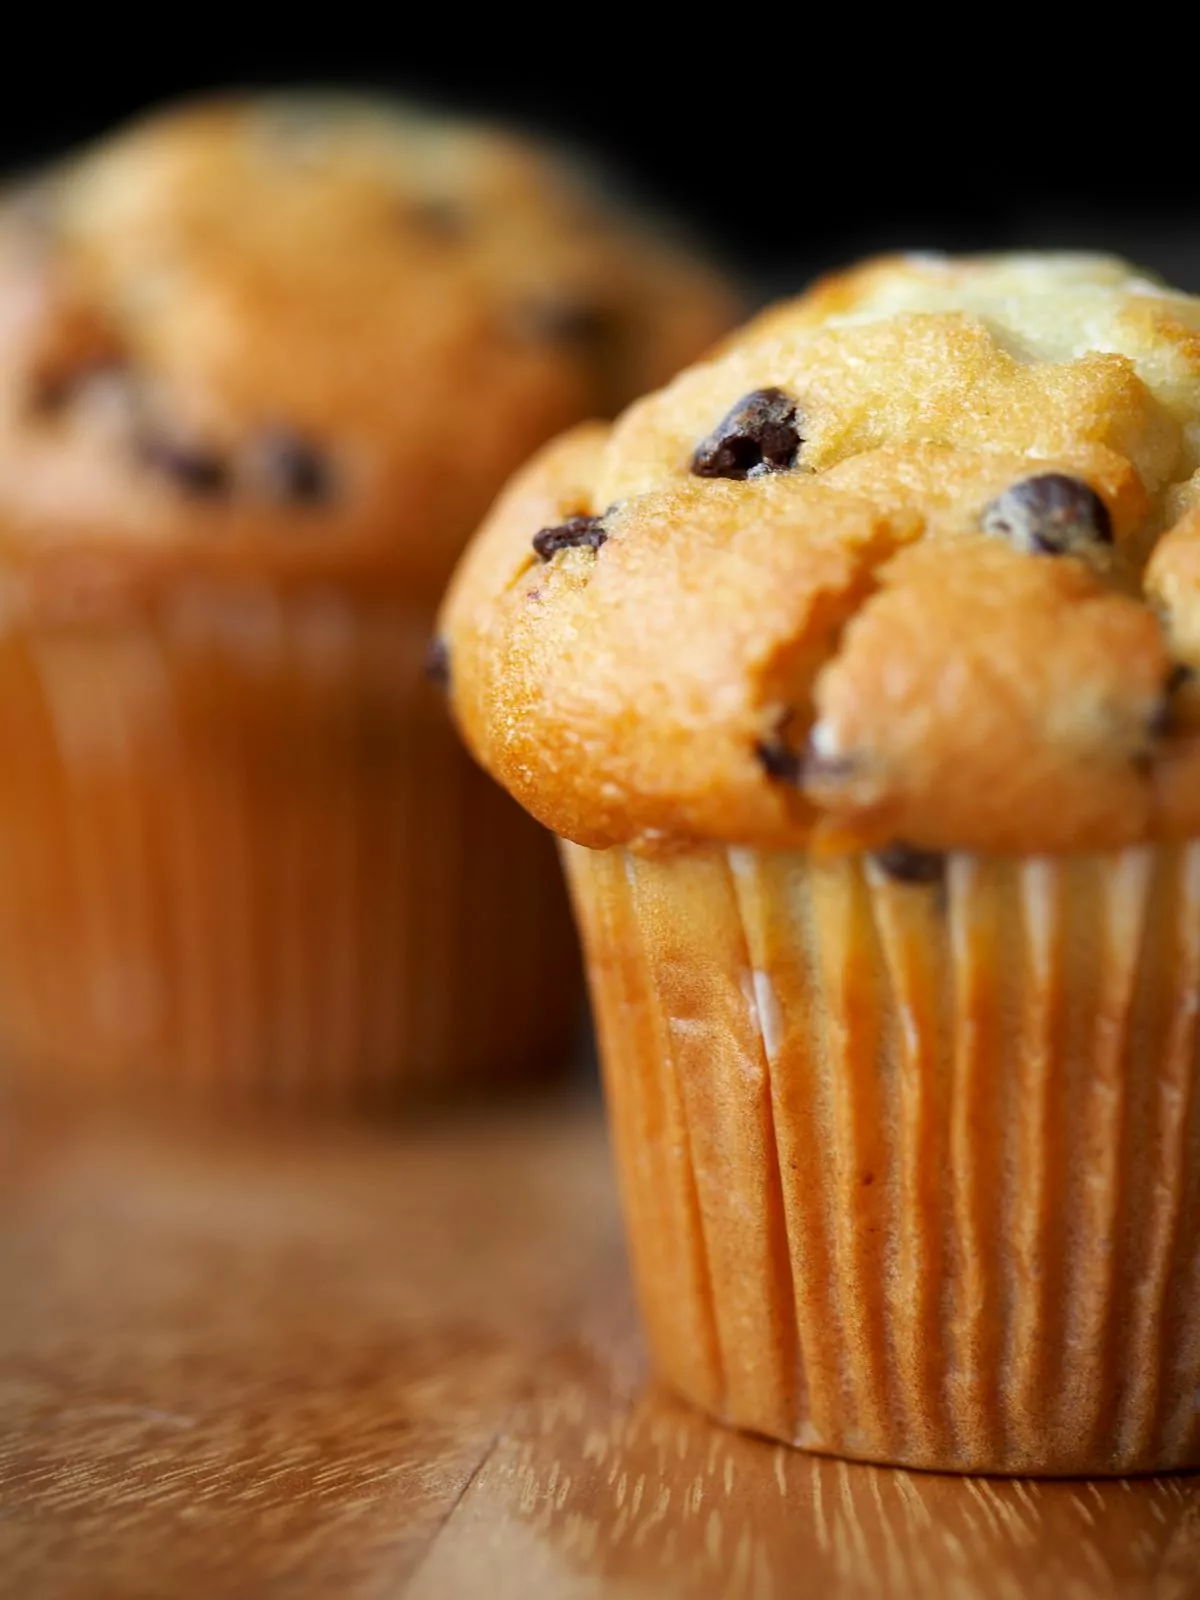 Baked chocolate chip muffins